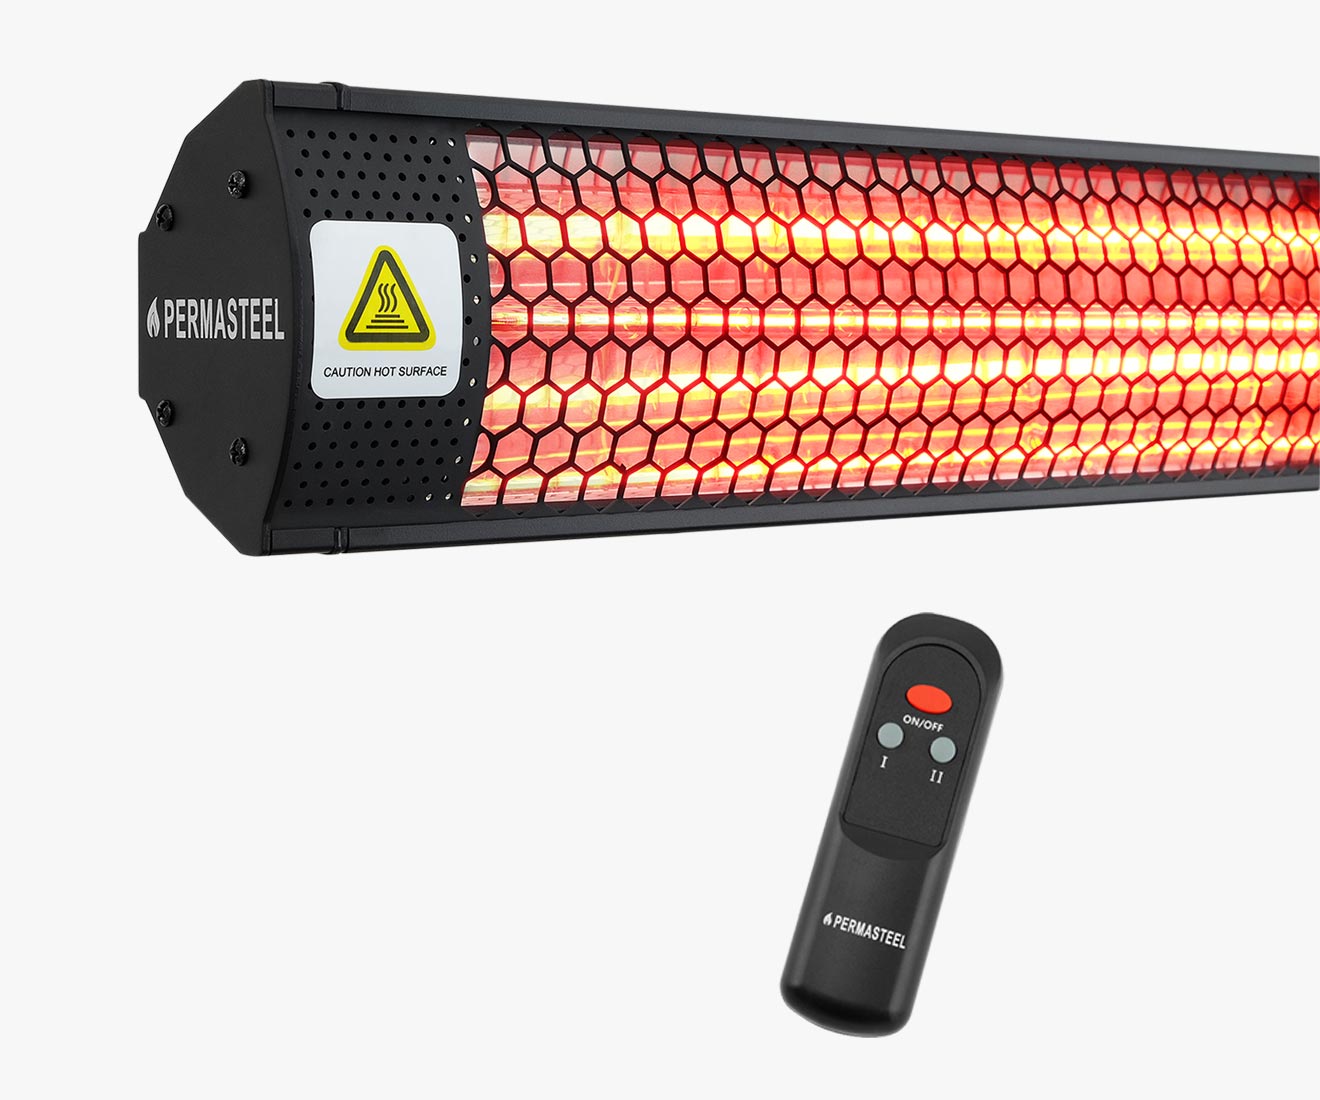 Permasteel PH-90203-BK 1500W Electric Mounted Patio Heater with Remote Control, for Wall or Ceiling